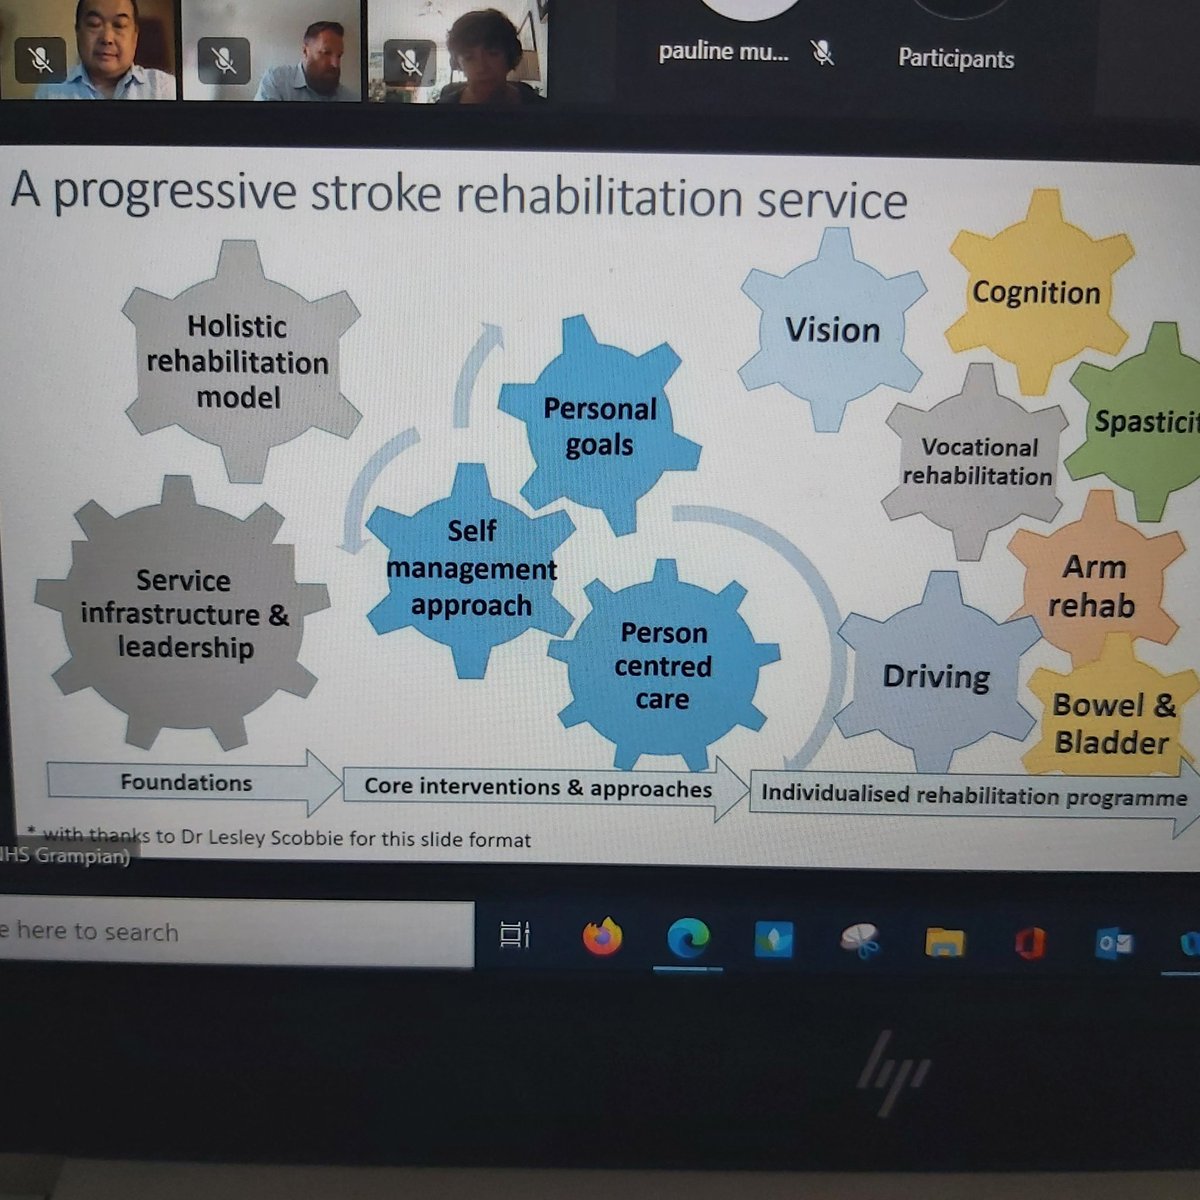 Person-centred approach to stroke rehabilitation session this morning led by @therese_jackson for the Scottish Stroke Improvement Programme. @CharlieChung90 @LesleyScobbie @neildmuir @lukewilliamsj @SSAHPF @jax_hamilton